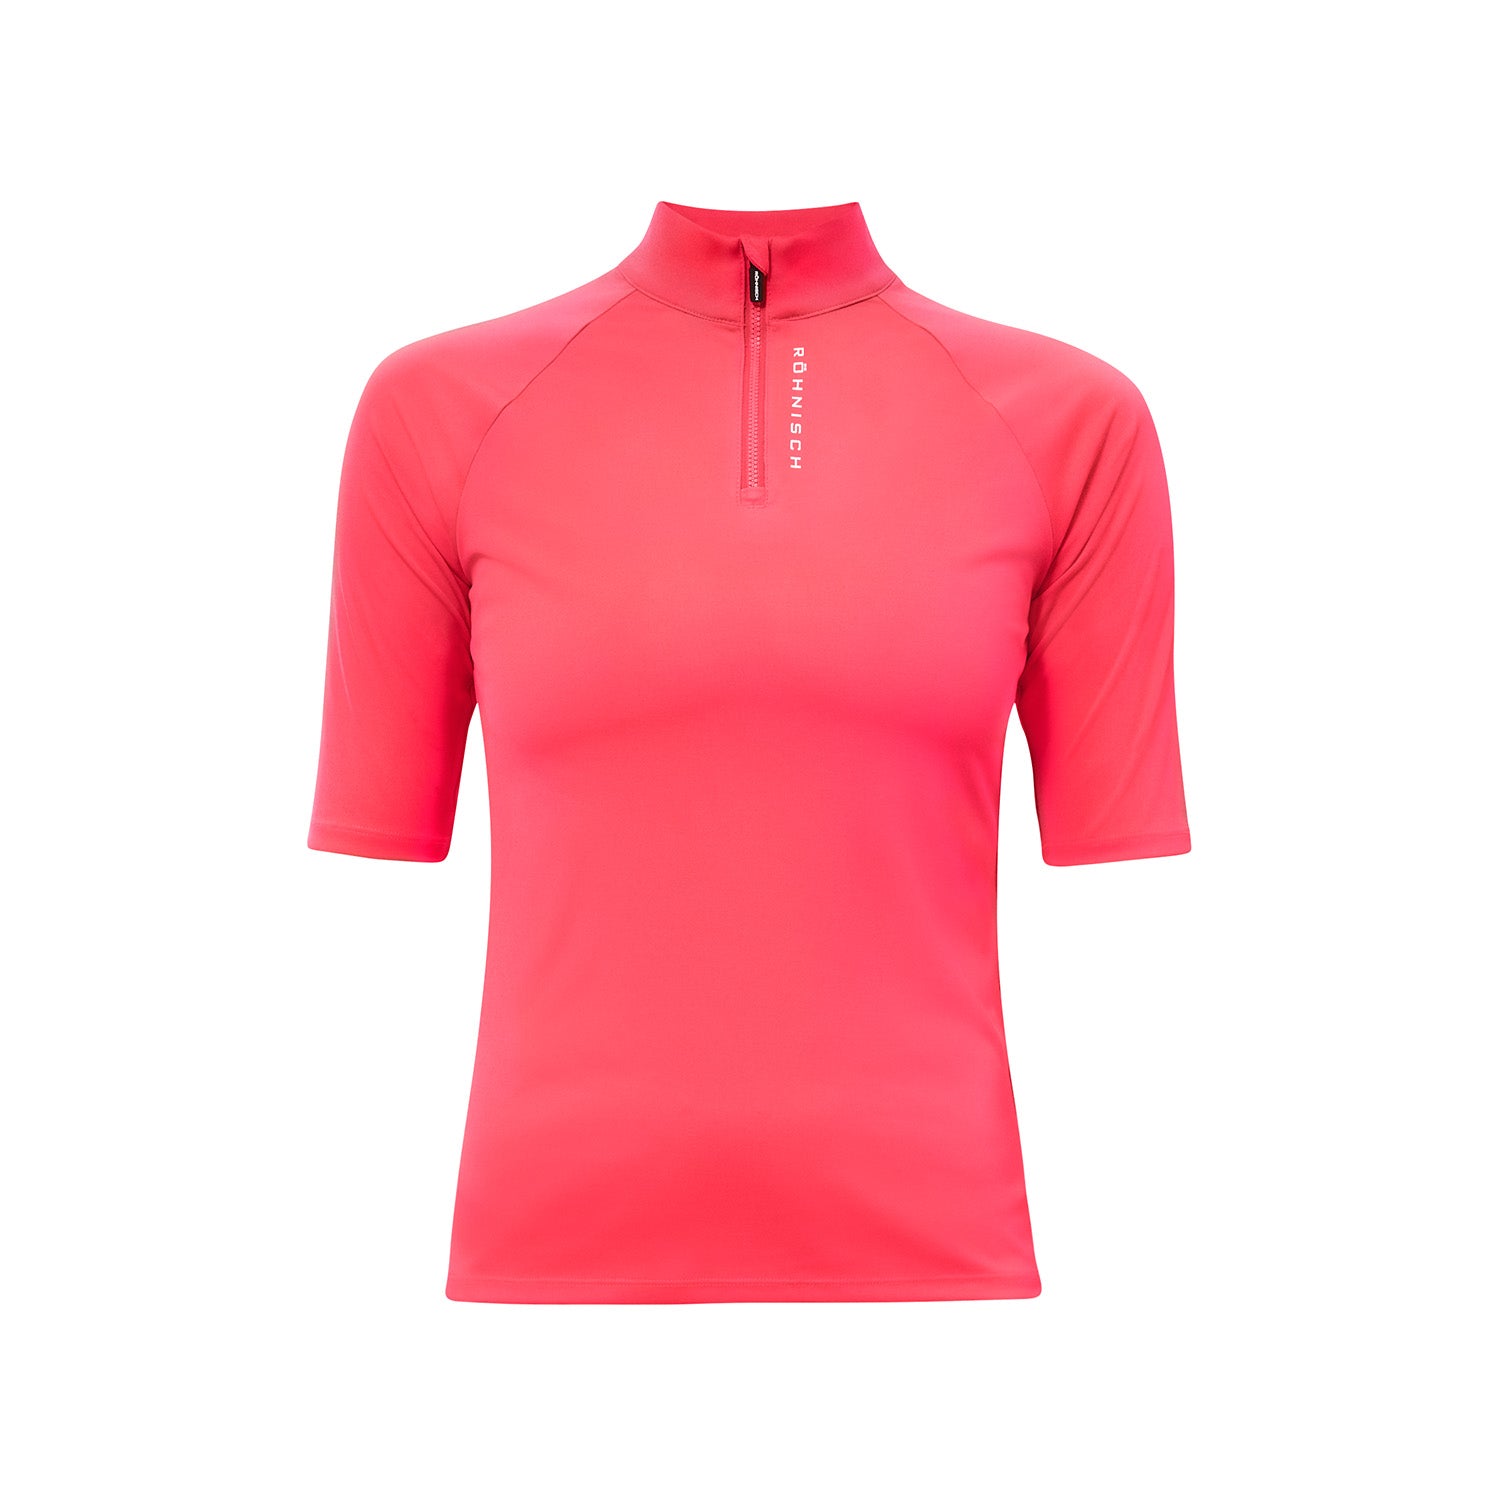 Rohnisch Ladies Sun Protection Short Sleeve Top in Neon Pink - Last One Small Only Left